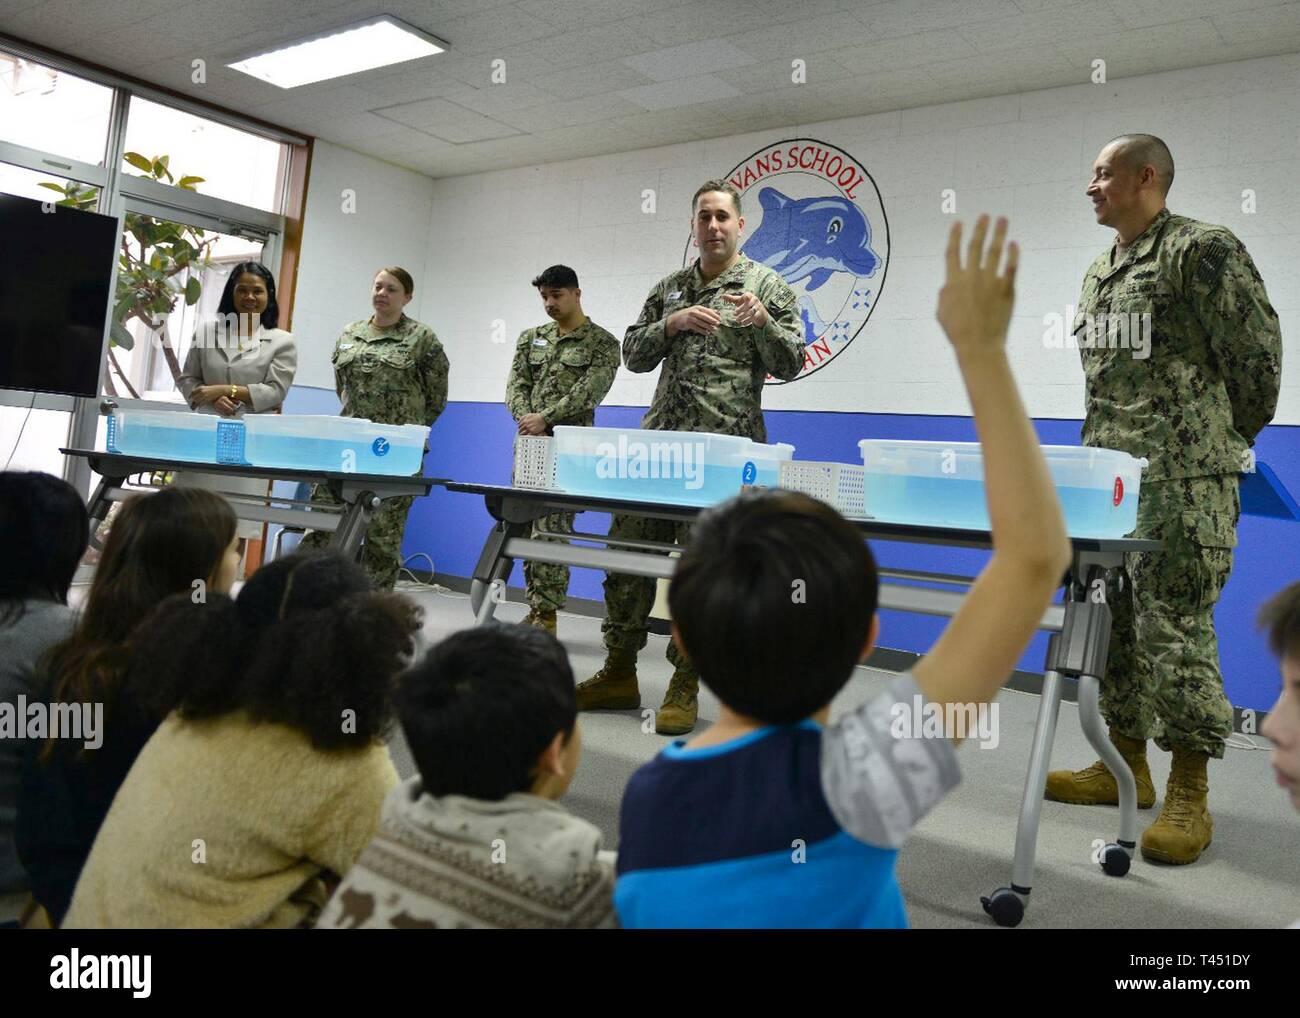 Japan (Feb. 26, 2019) Lt. John Pinachio, assigned to Naval Facilities Engineering Command Far East’s public works department, explains the job of an engineer to students during a foil boat competition at The Sullivans Elementary School at Fleet Activities (FLEACT) Yokosuka, Feb. 26, 2019.  The foil boat competition is an event during National Engineers Week emphasizing the importance of learning math, science and technical skills. FLEACT Yokosuka provides, maintains, and operates base facilities and services in support of the U.S. 7th Fleet's forward-deployed naval forces, 71 tenant commands,  Stock Photo